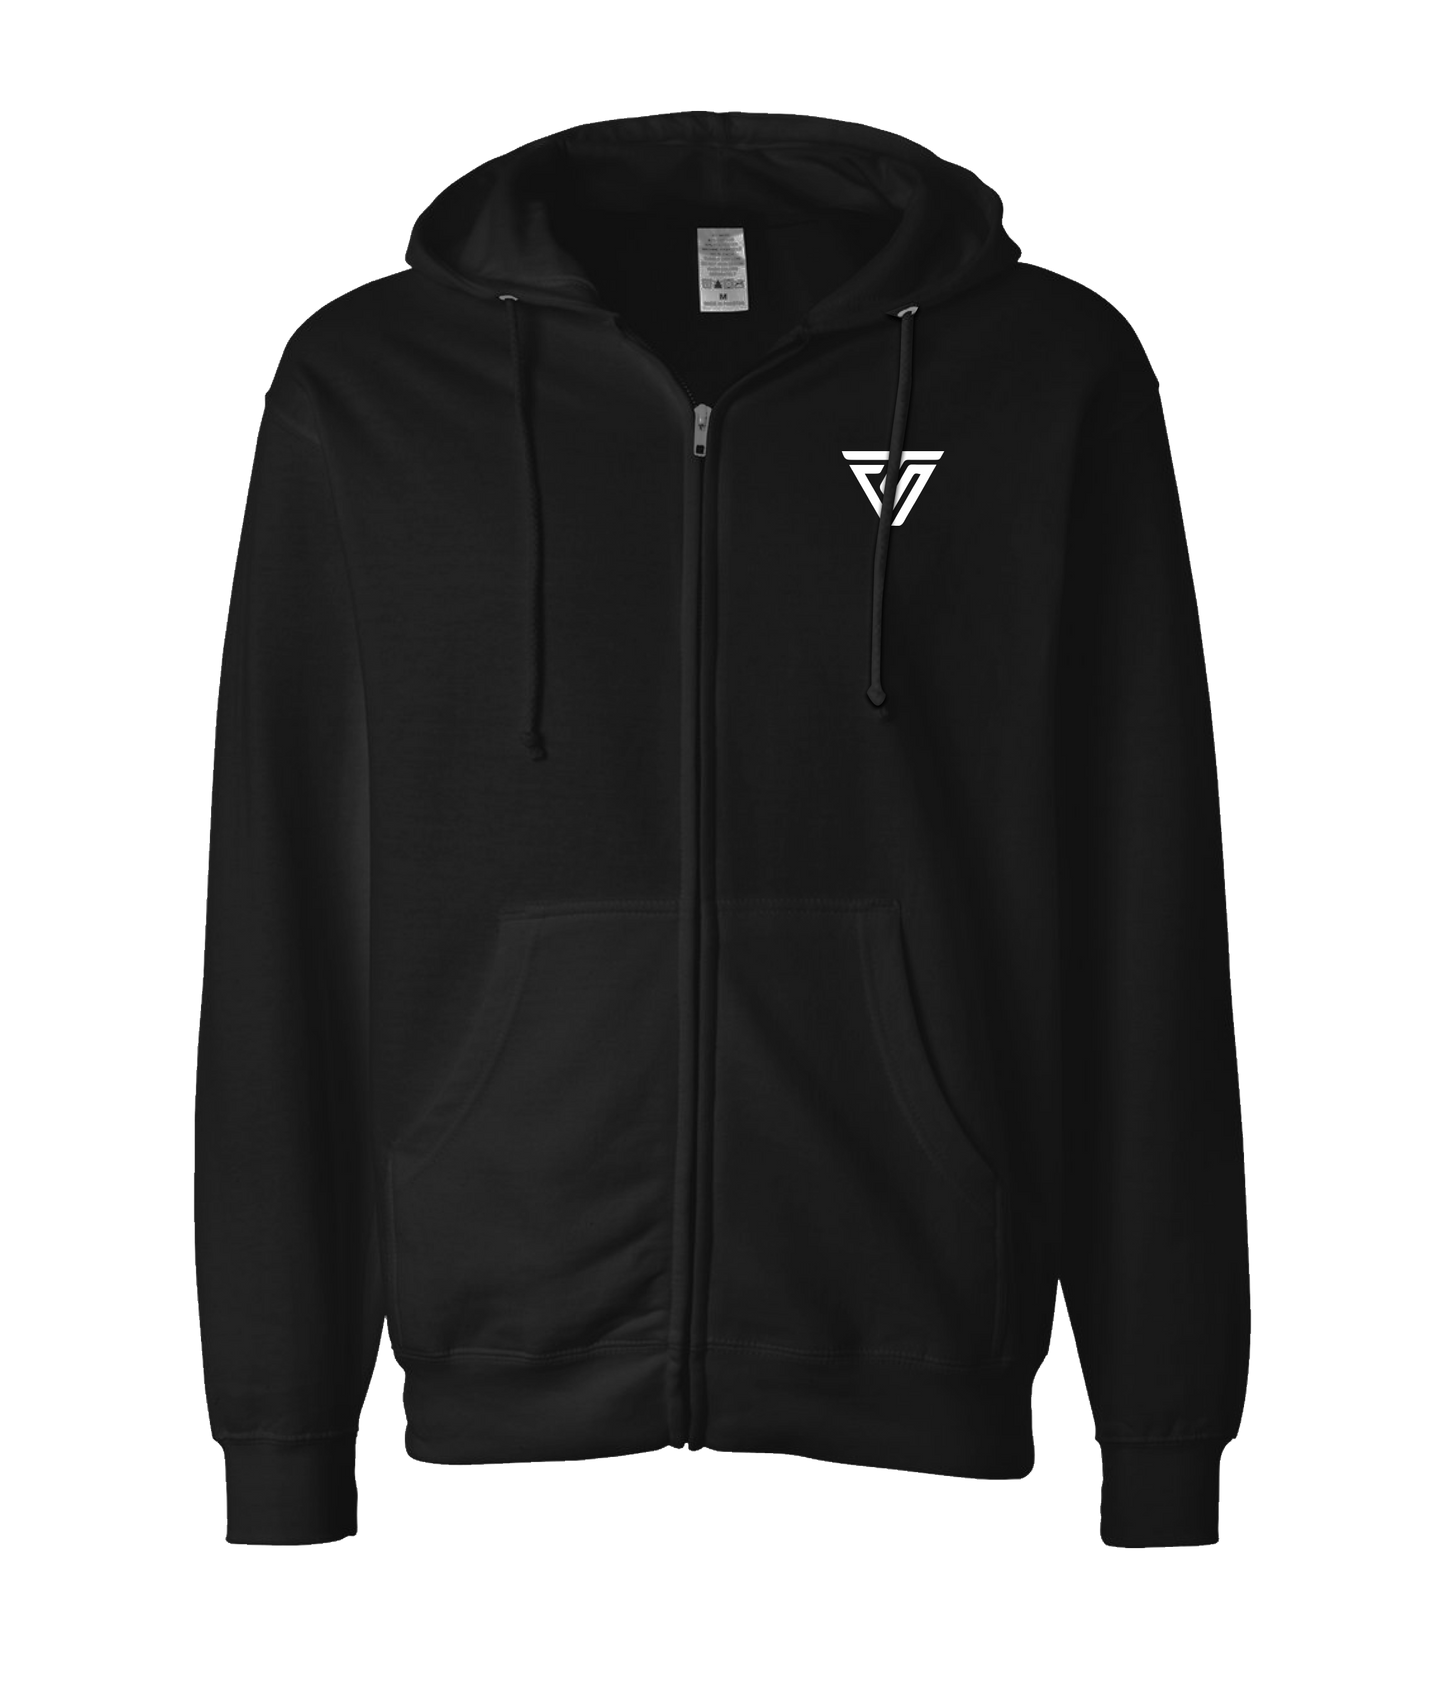 TheShift - The Triangle - Black Zip Up Hoodie